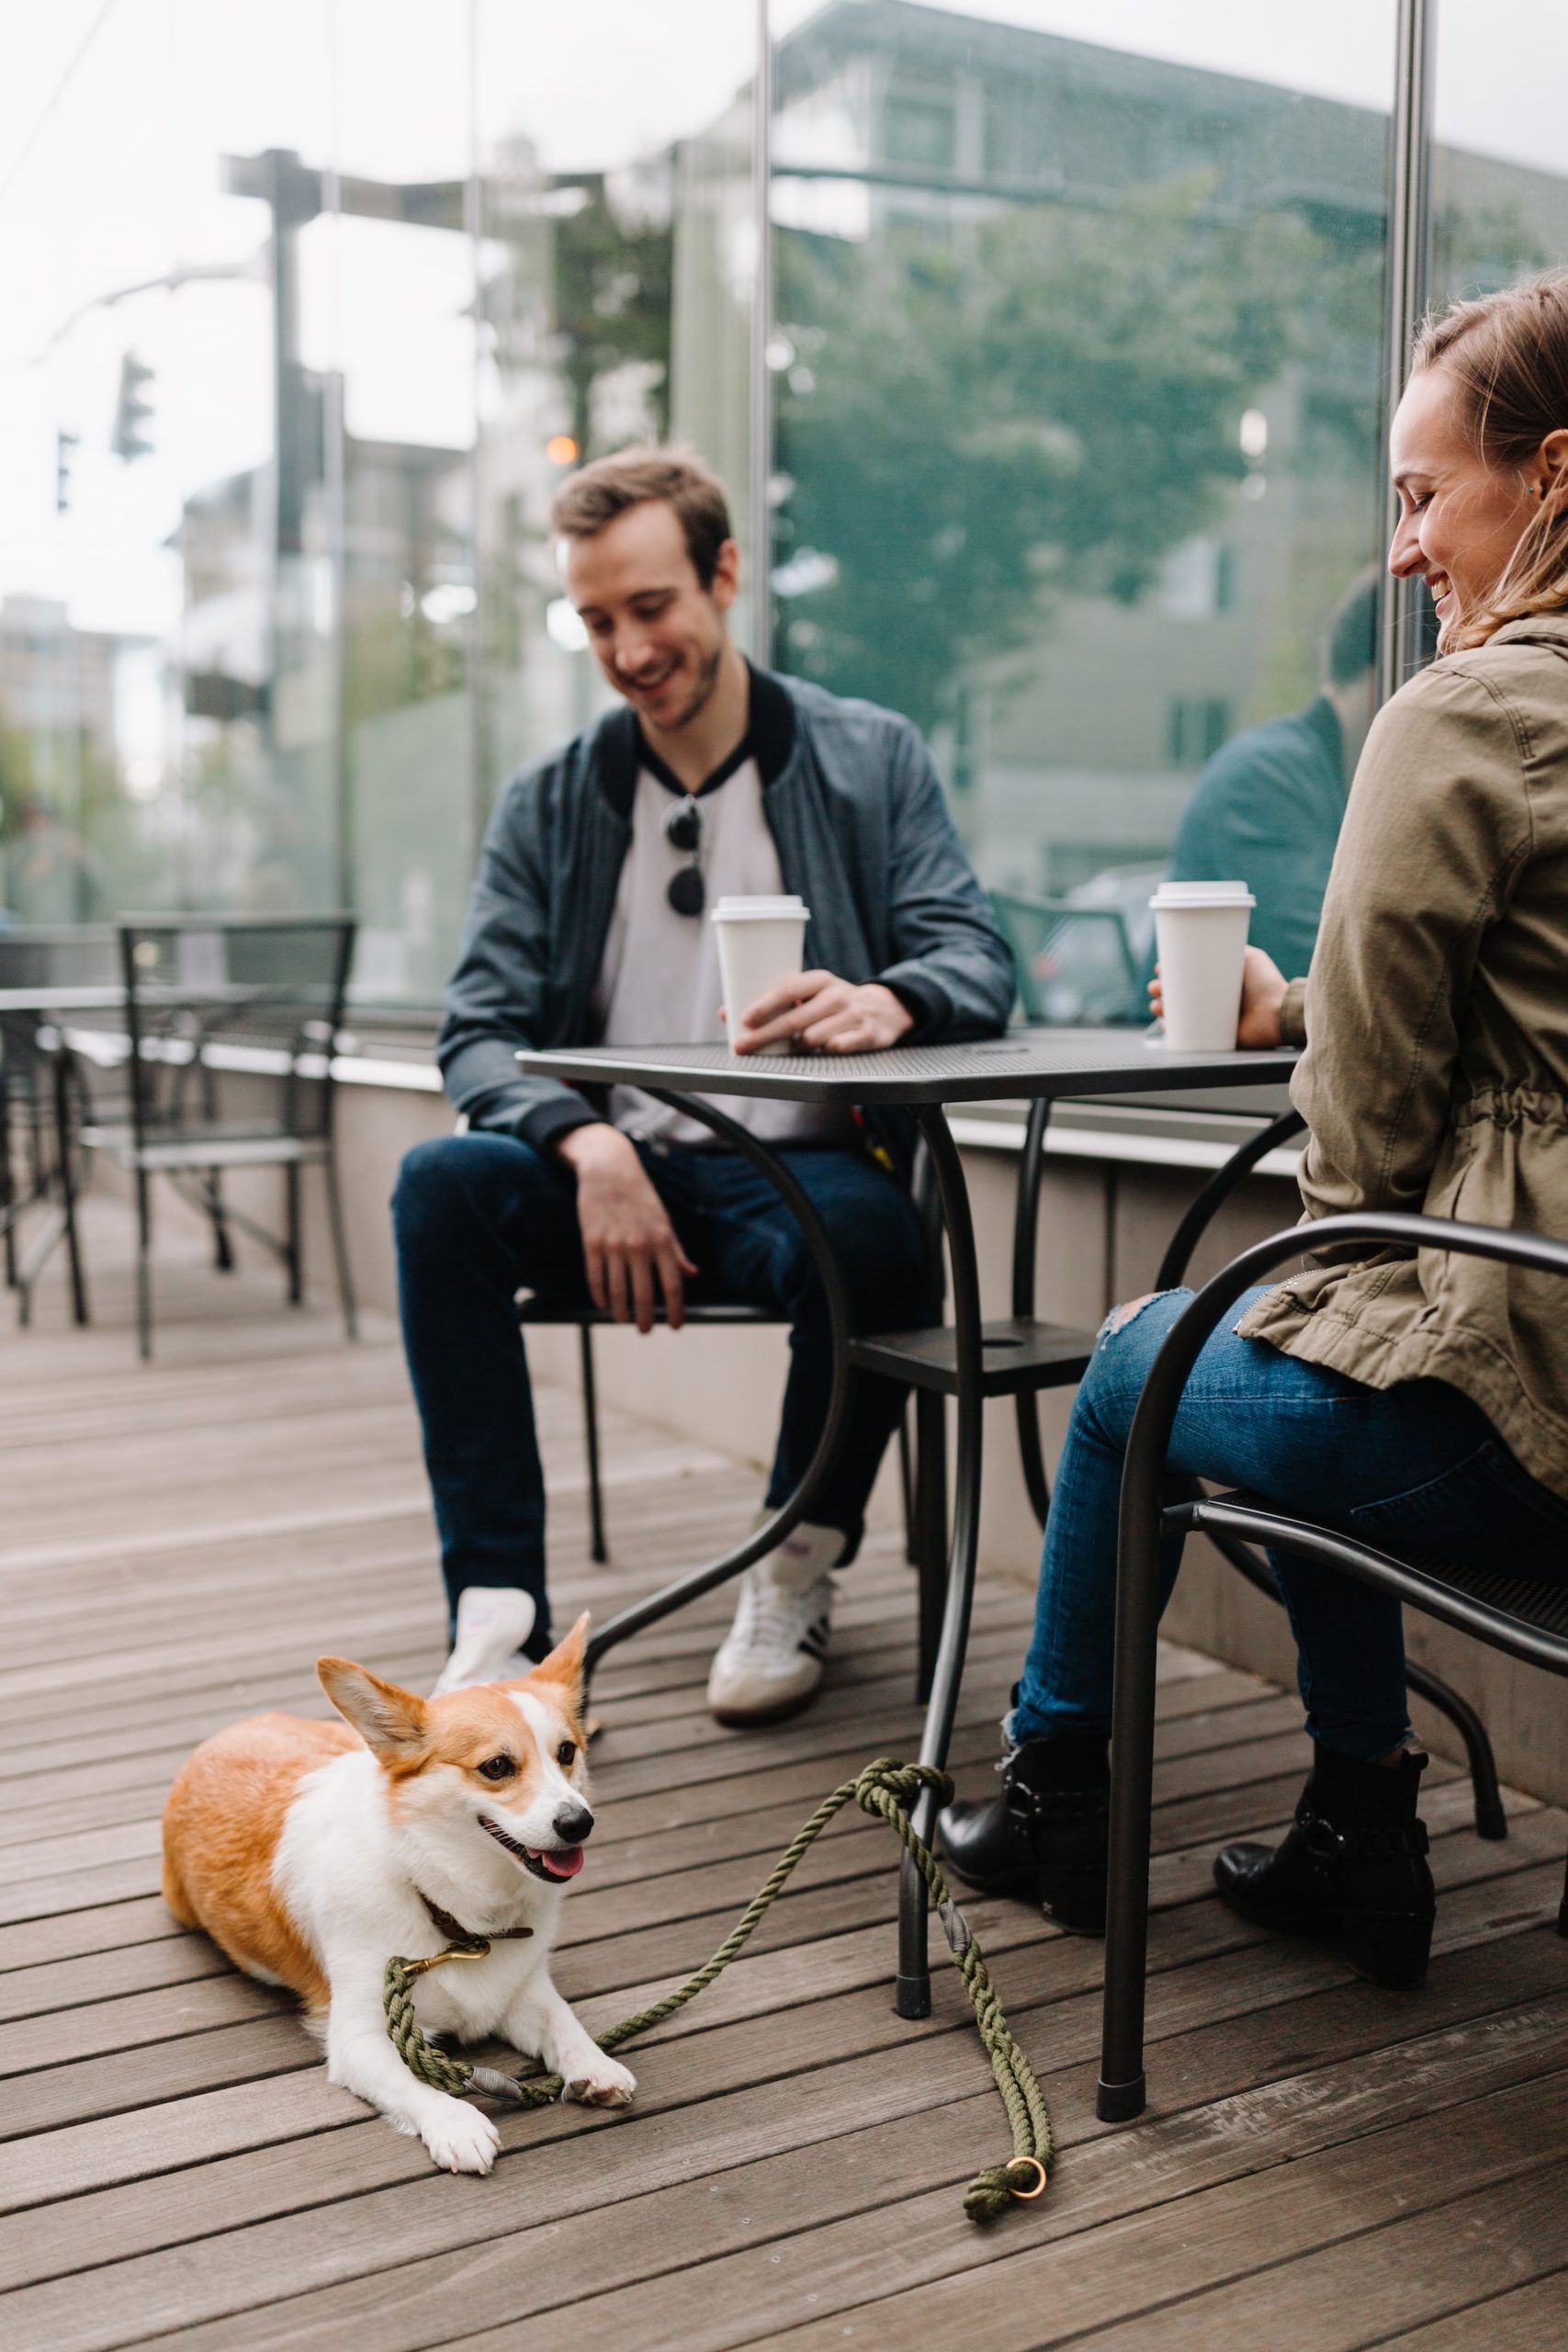 Two men sitting at an outdoor table at a restaurant. A Corgi dog is resting on the ground next to them